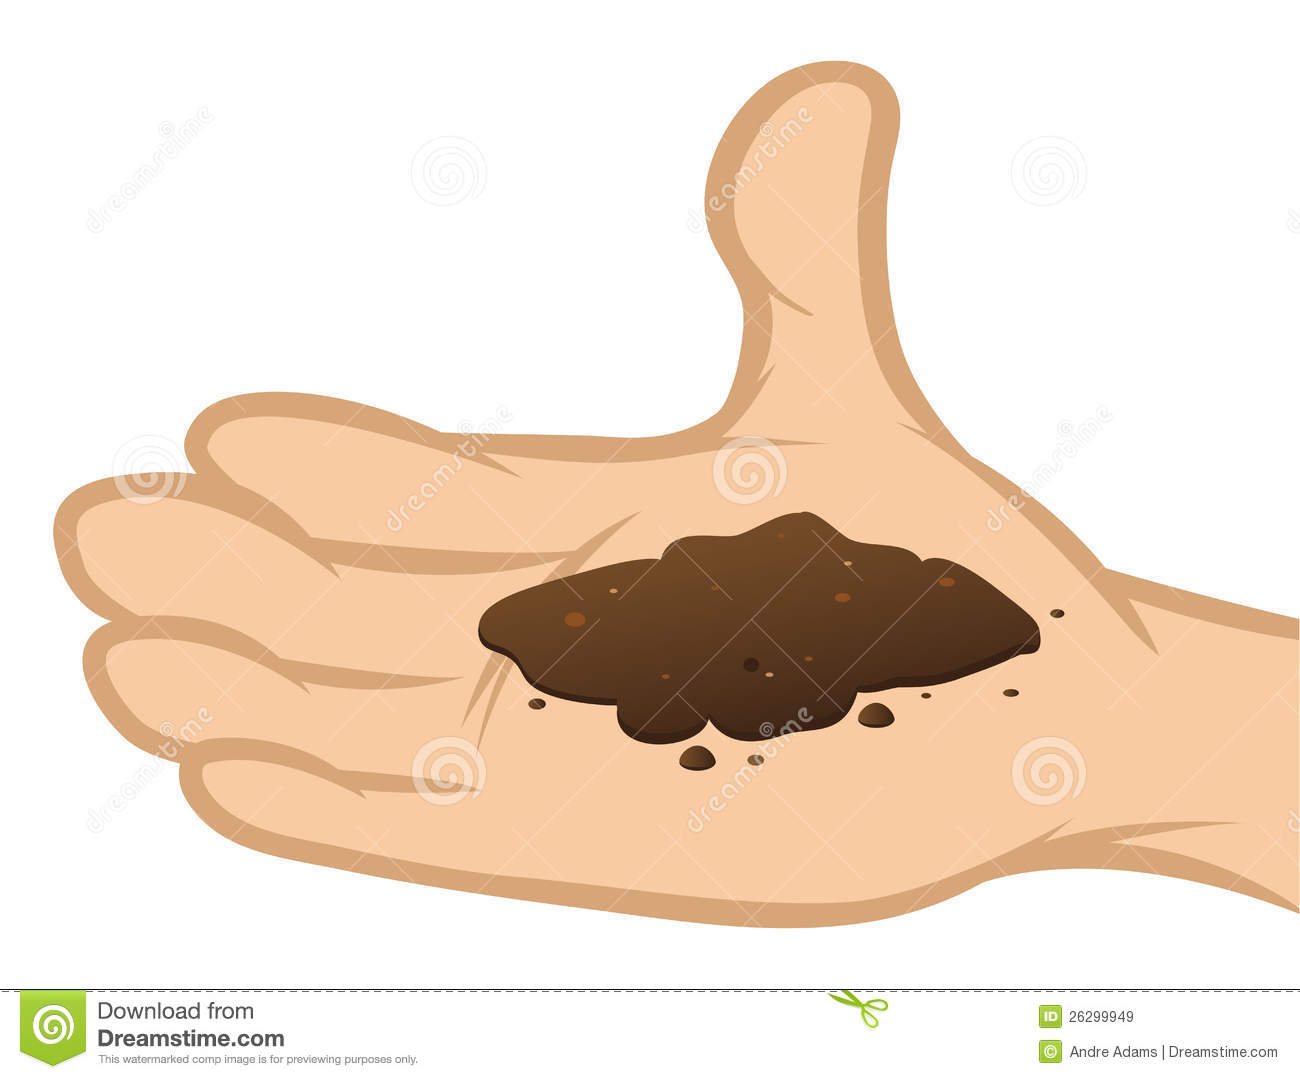 Soil Sample Royalty Free Stock Images   Image  26299949